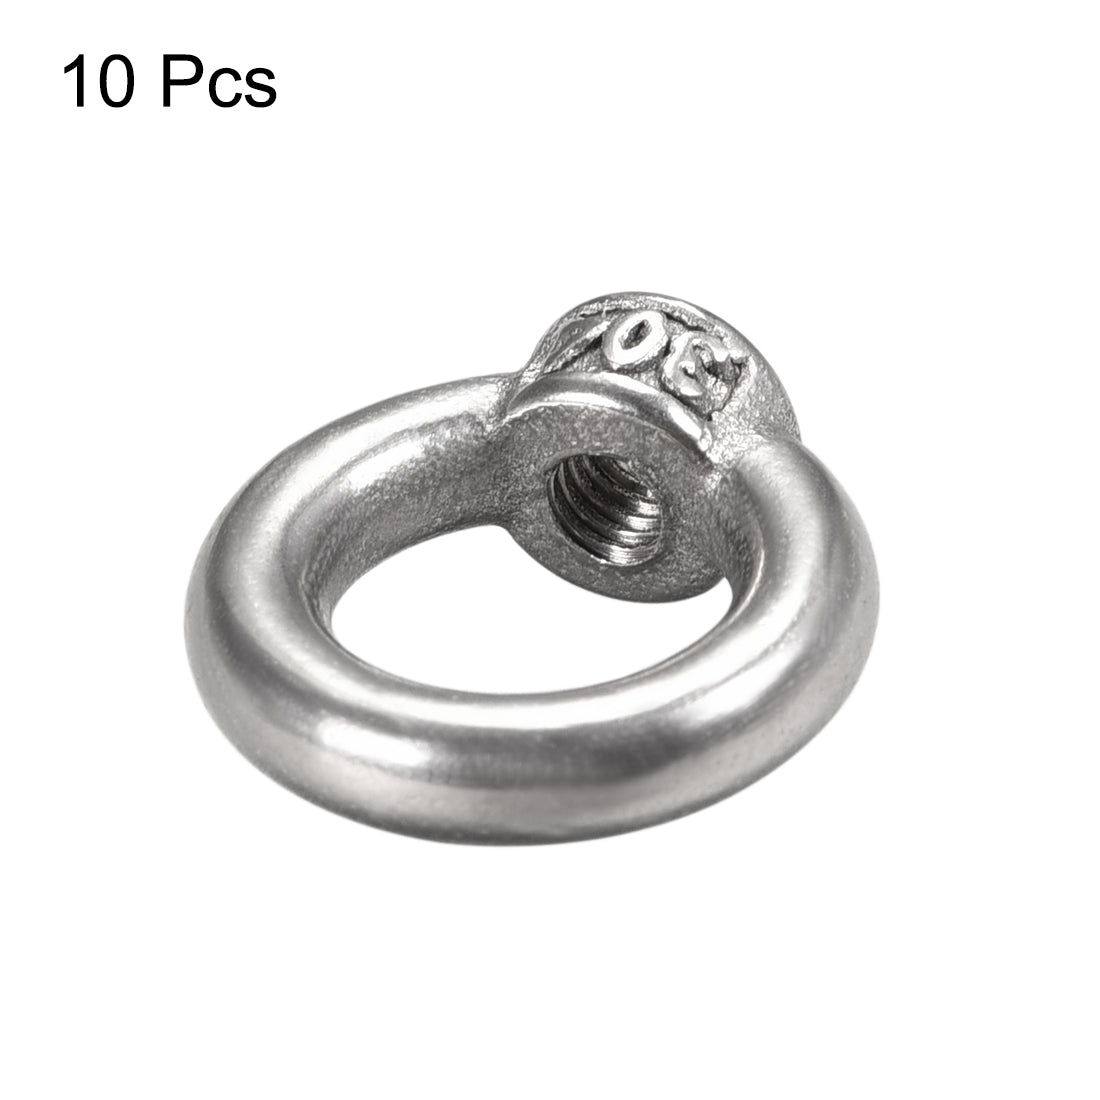 uxcell Uxcell M4 Female Thread 304 Stainless Steel Lifting Eye Nuts Ring 10pcs